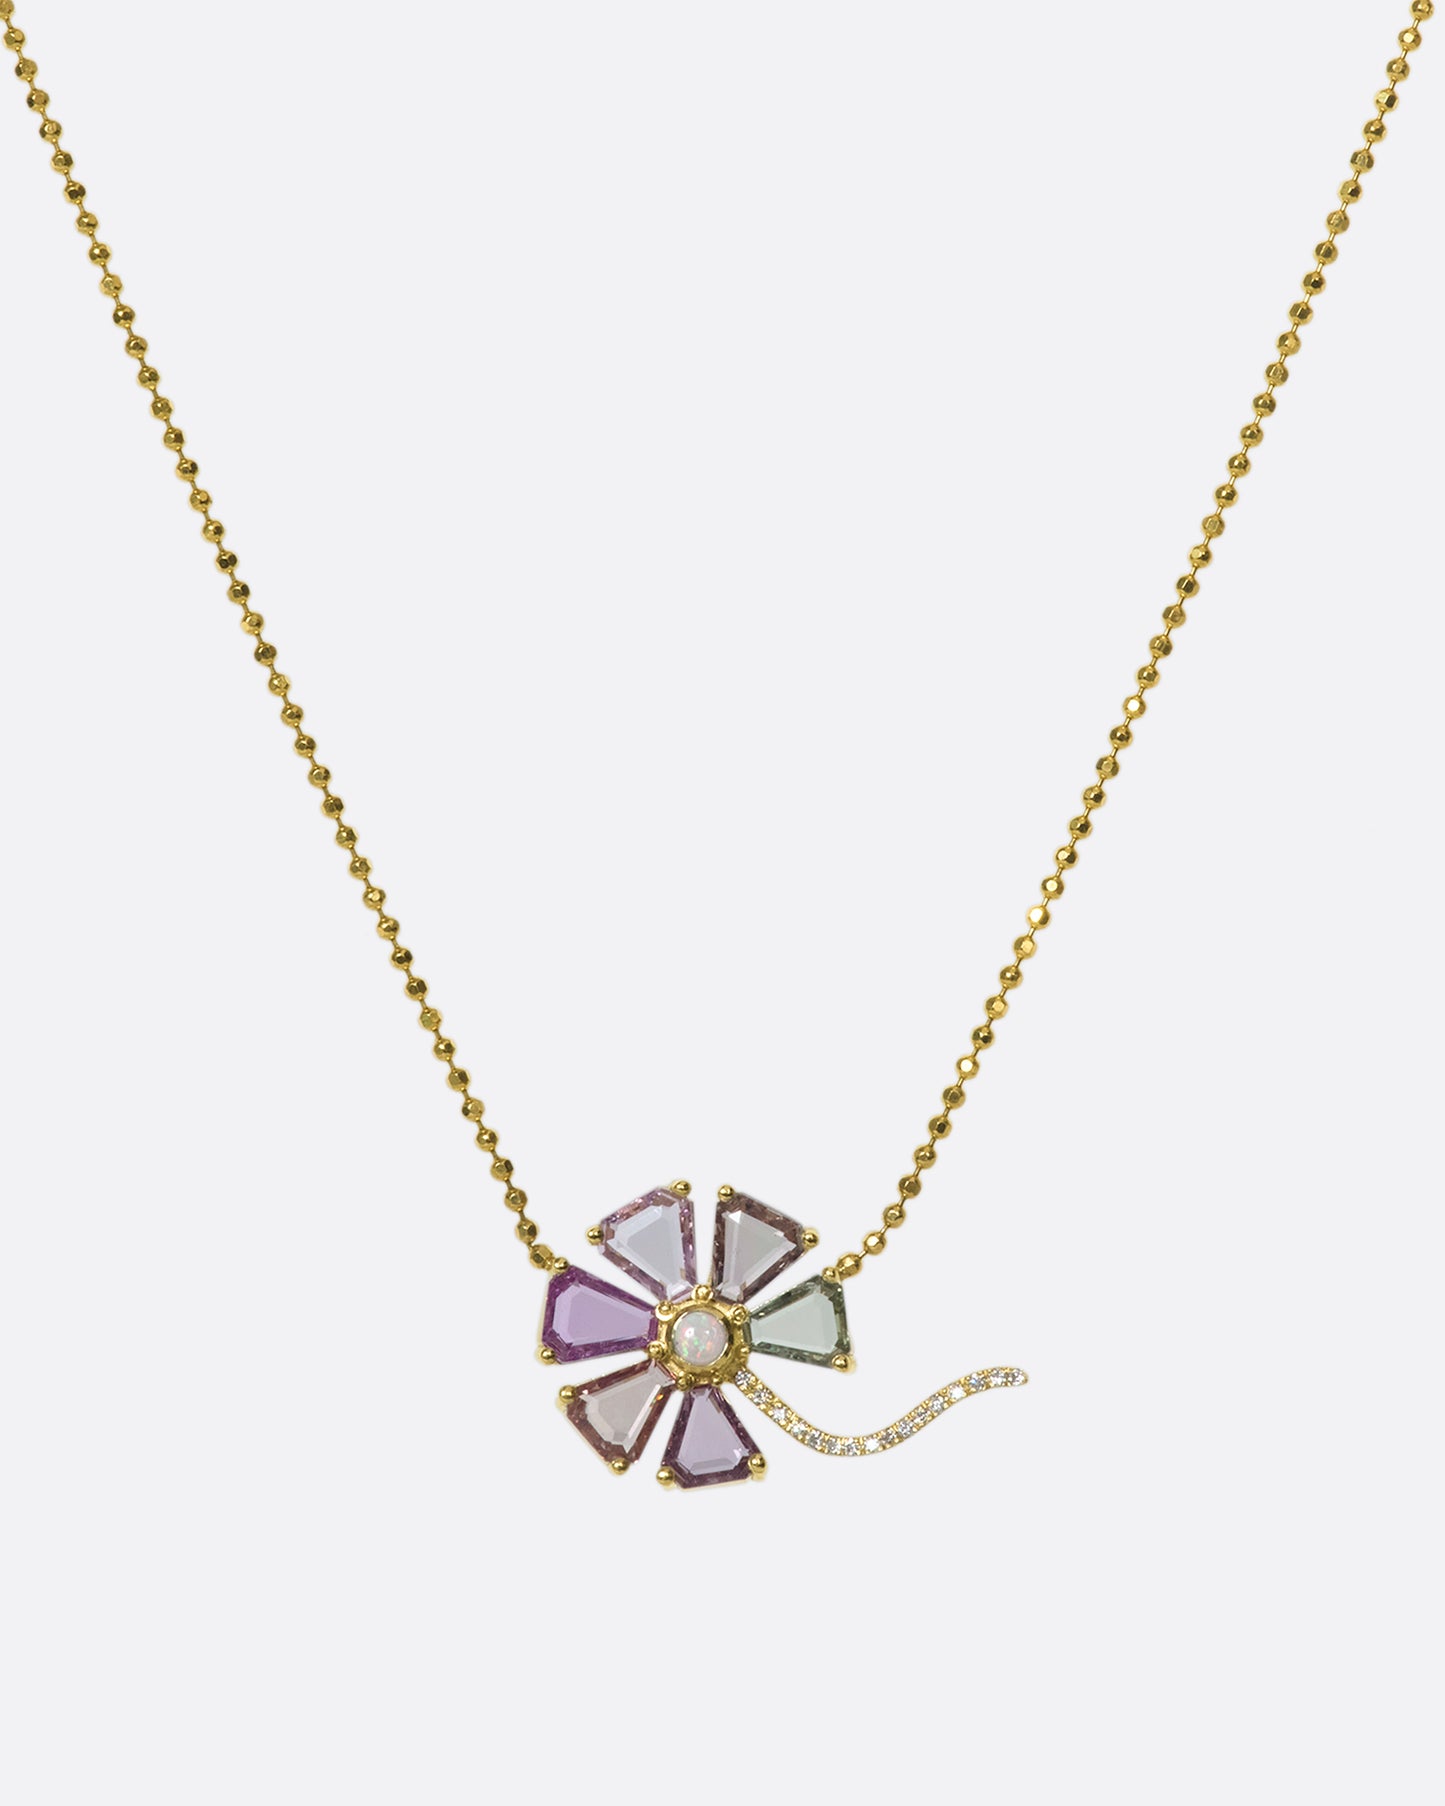 A zoomed out view of a flower pendant with sapphire petals, diamond stem, and opal center on a gold ball chain.